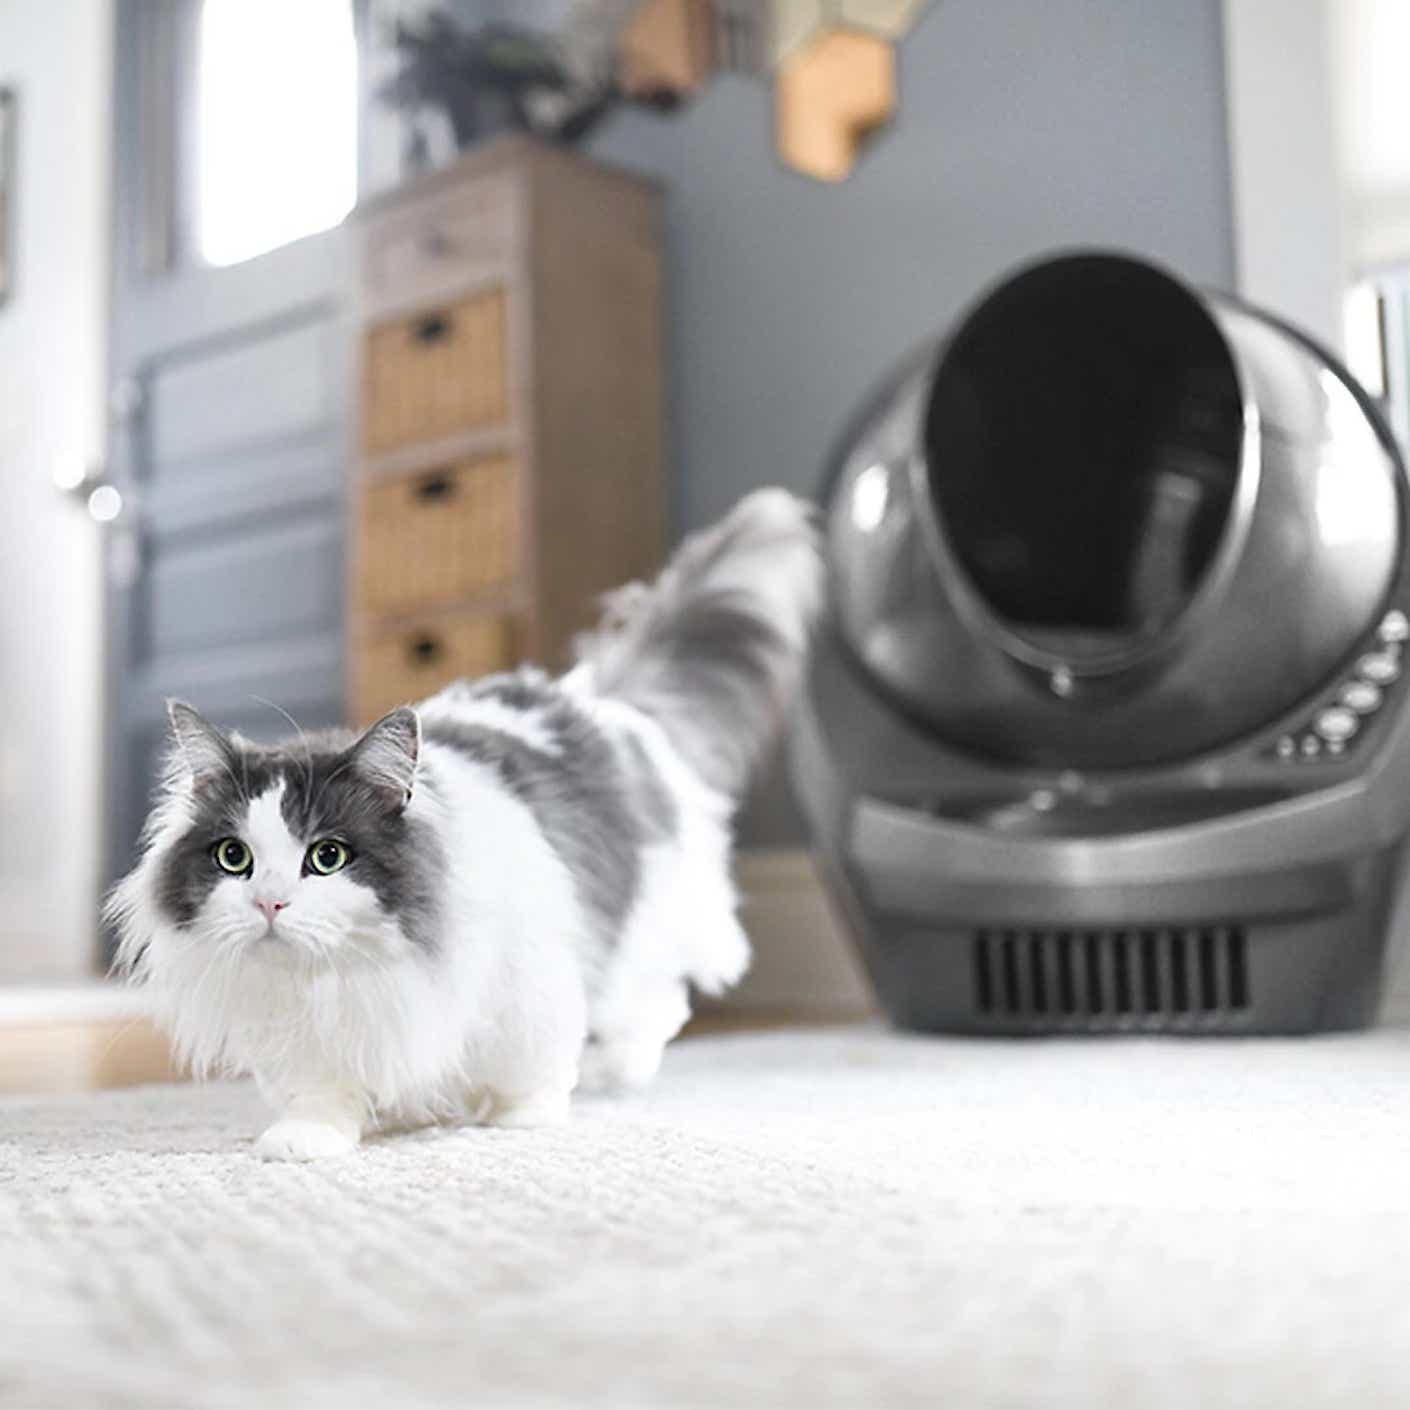 A fluffy cat emerges from a black smart litterbox.